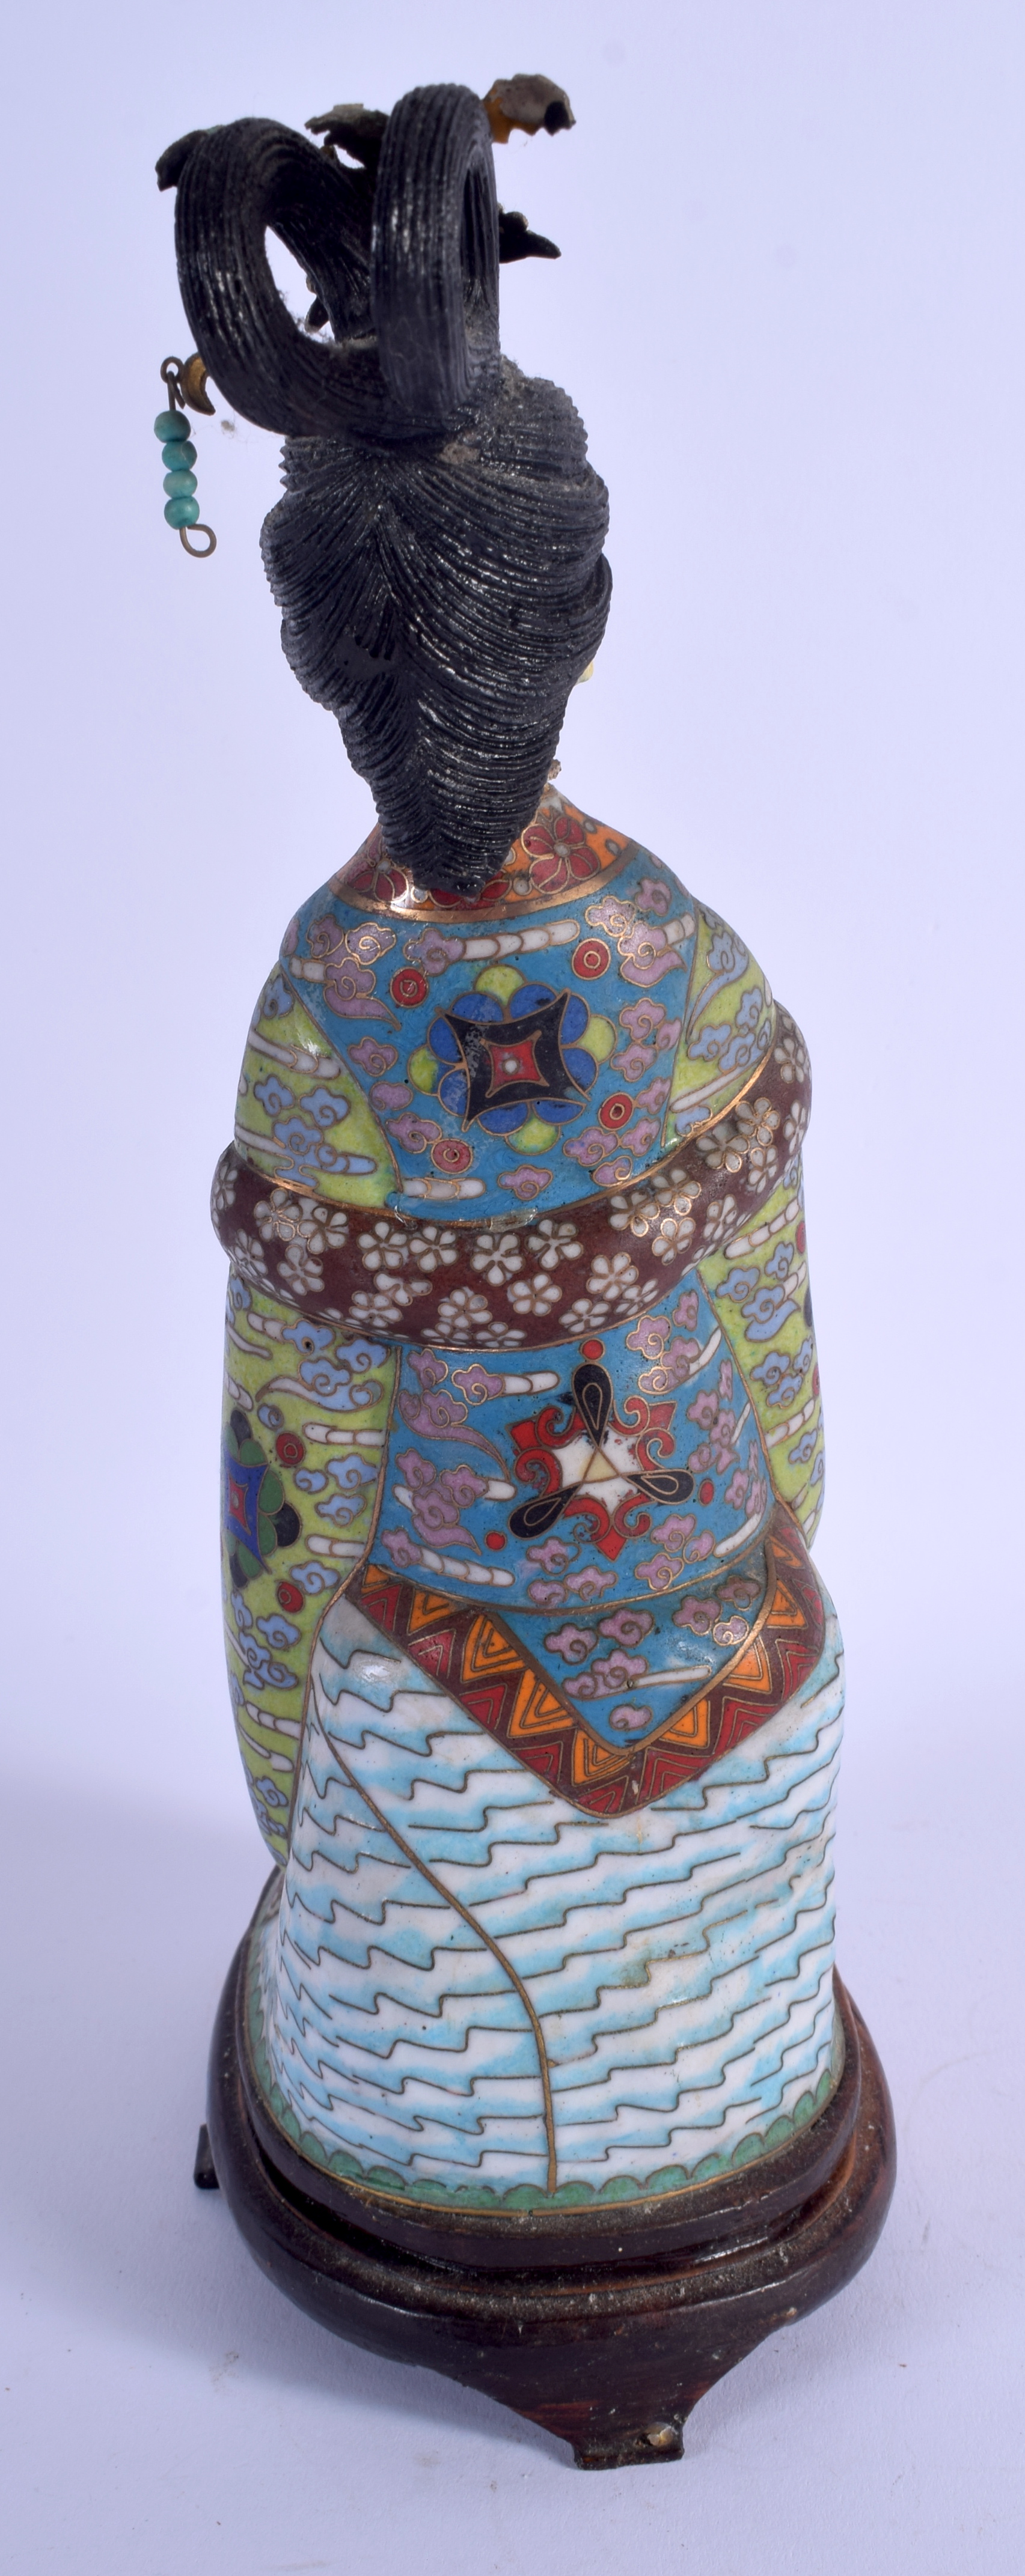 AN EARLY 20TH CENTURY CHINESE CLOISONNE ENAMEL AND IVORY GUANYIN decorated with motifs. 27 cm high. - Image 2 of 3